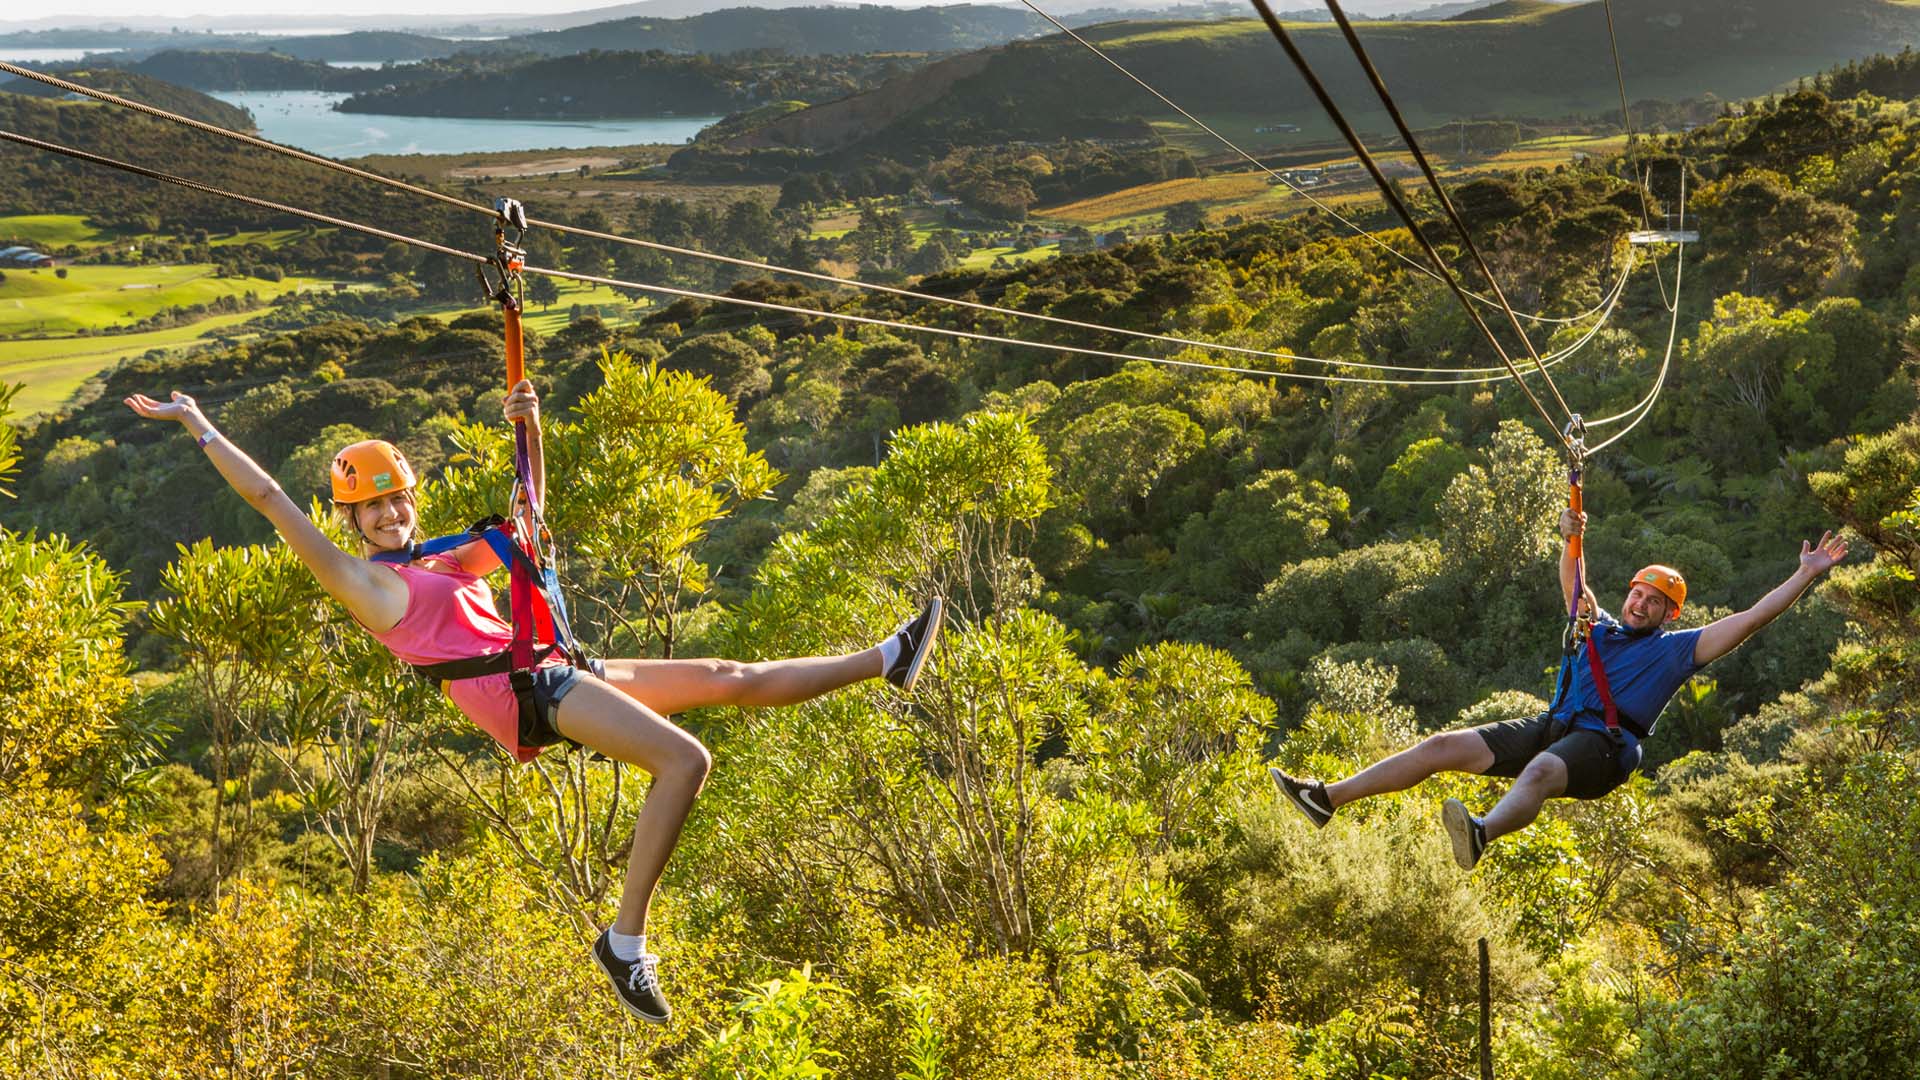 Our Auckland: Seven Epic Outdoor Adventures Our Readers Love to Have in Auckland